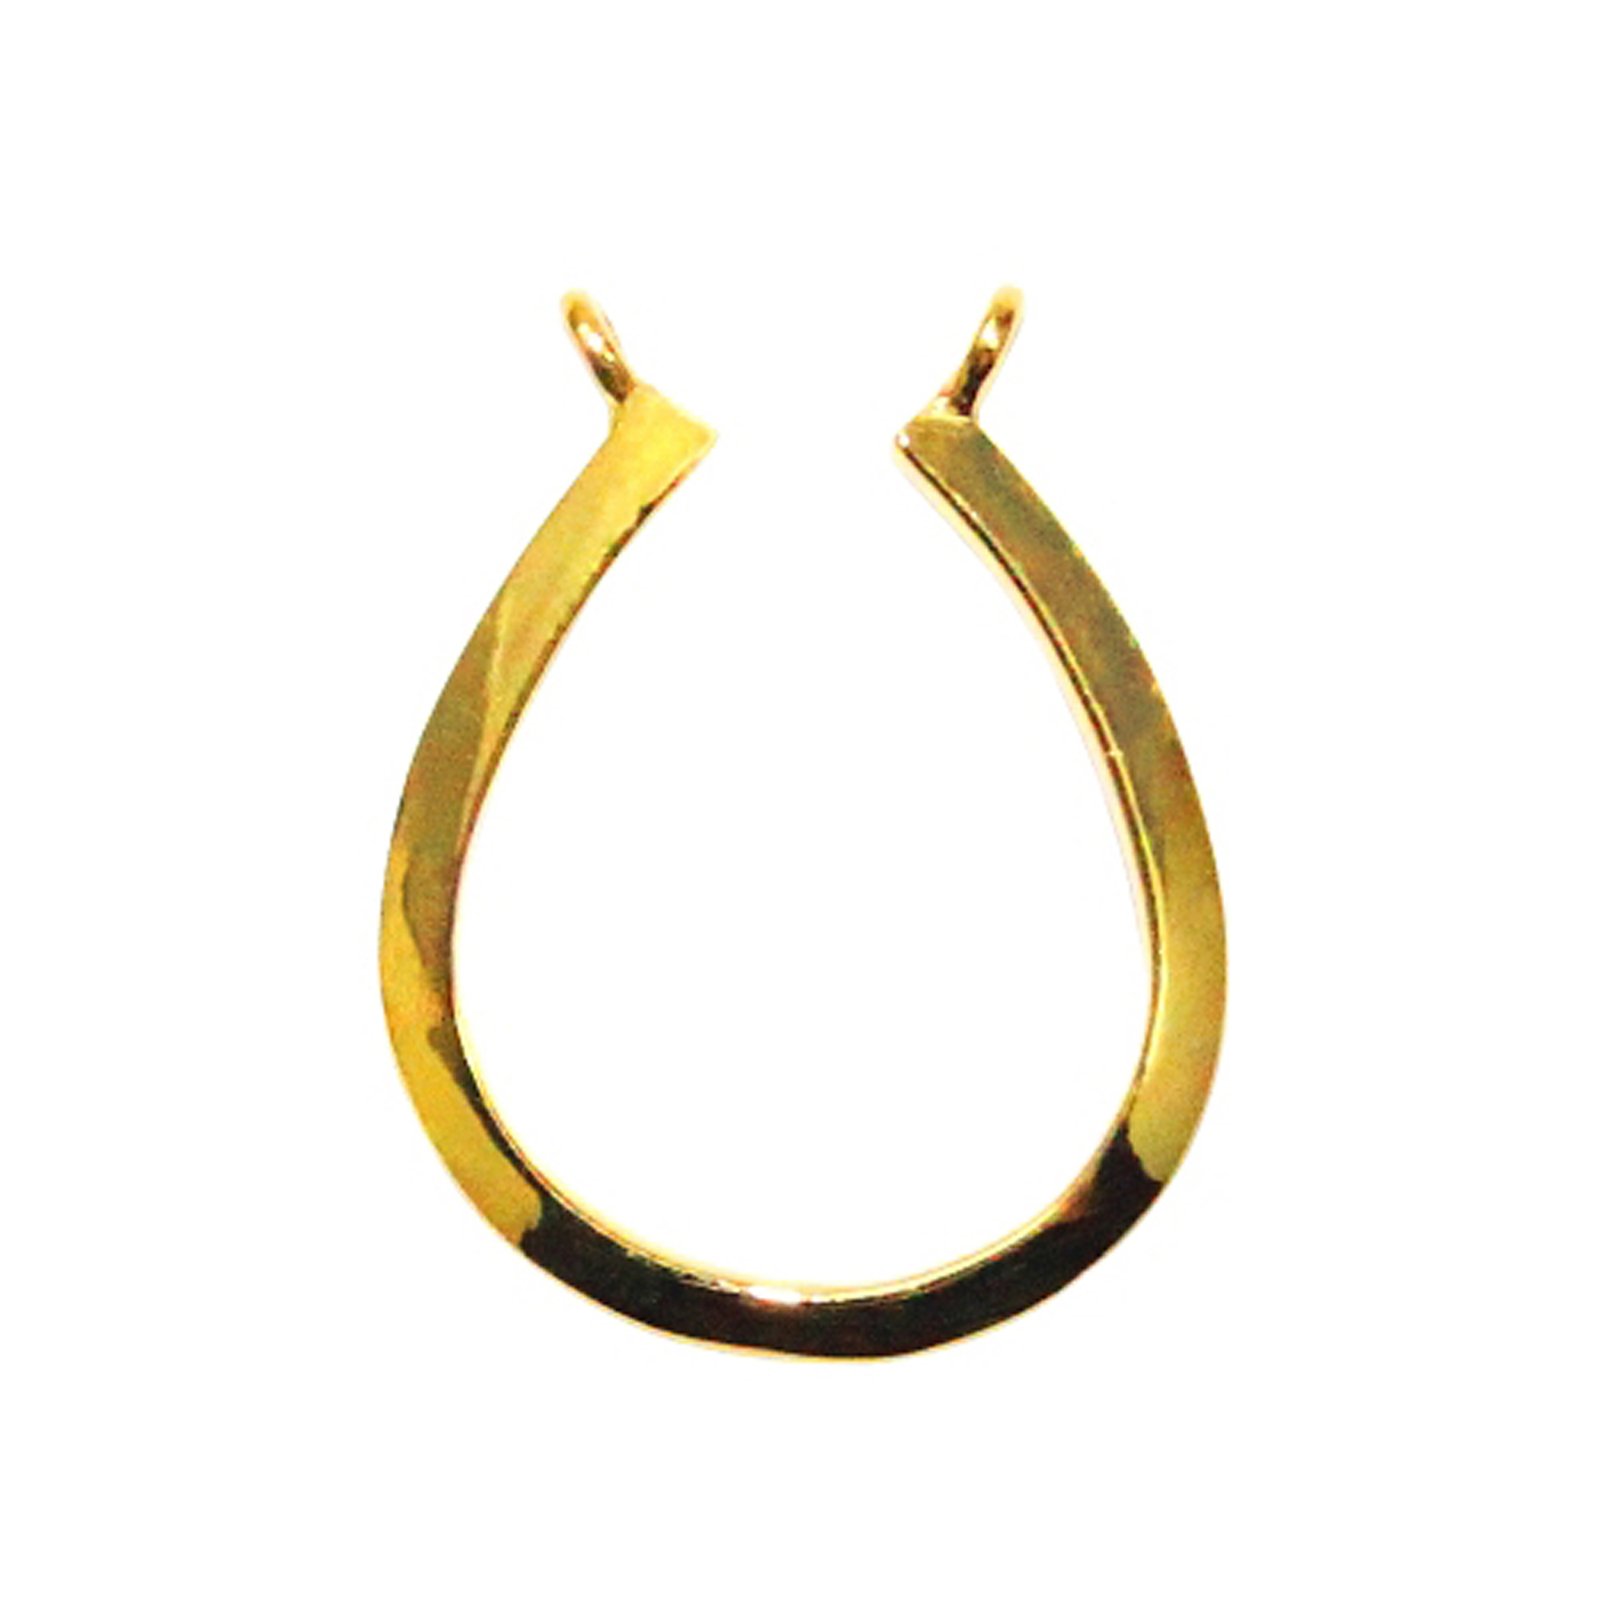 Solid 14k pure yellow gold horse shoe necklace vintage jewelry